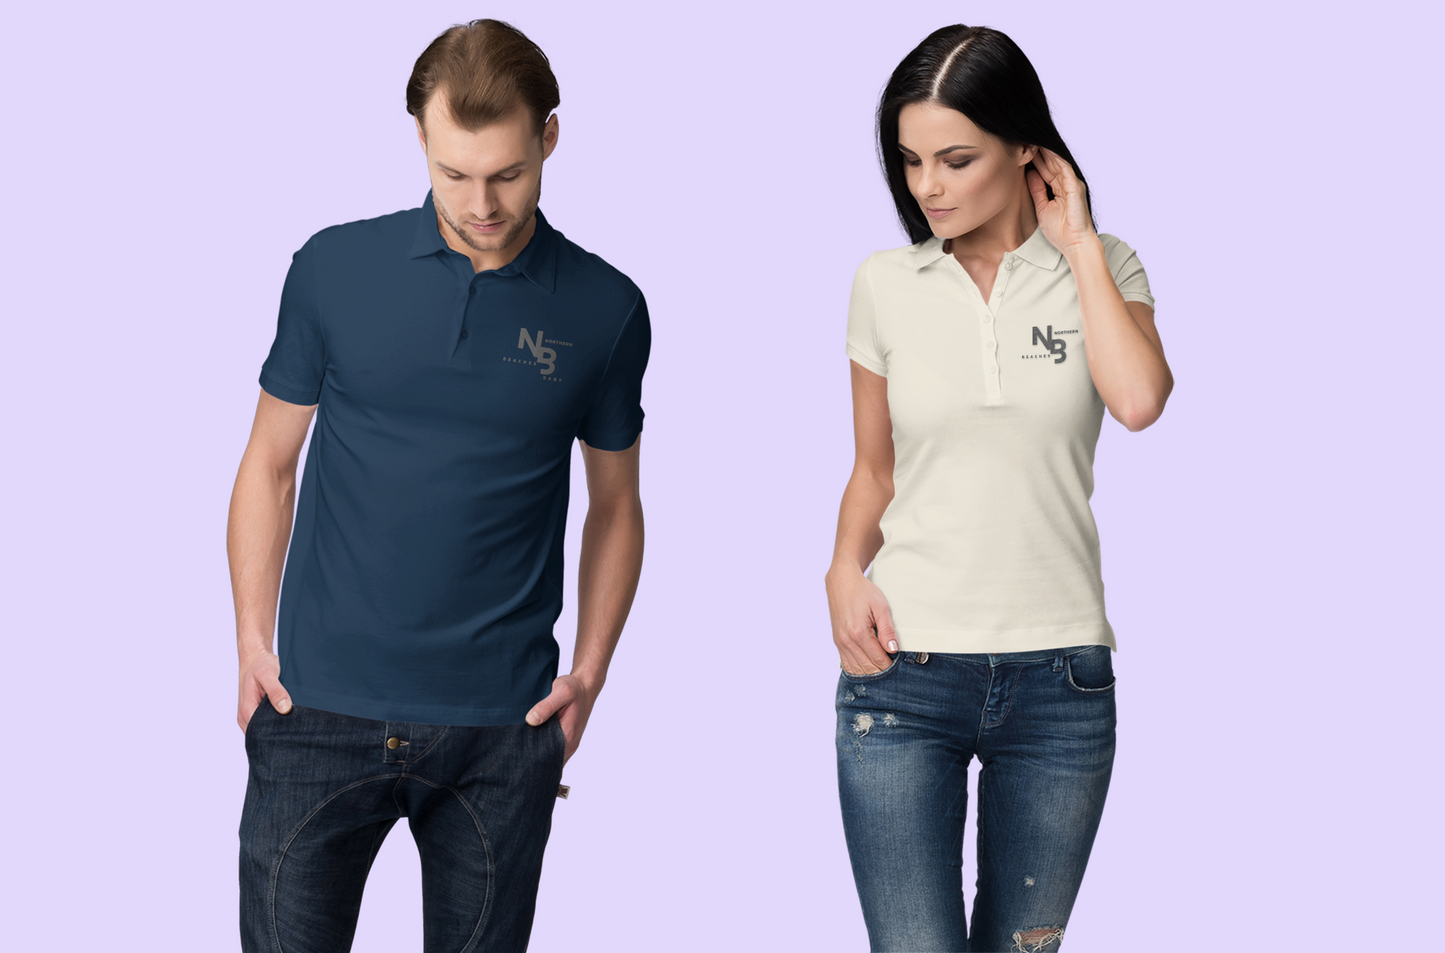 Polo Shirts 100% Cotton with customised Northern Beaches Logos 20% off Sale on Now